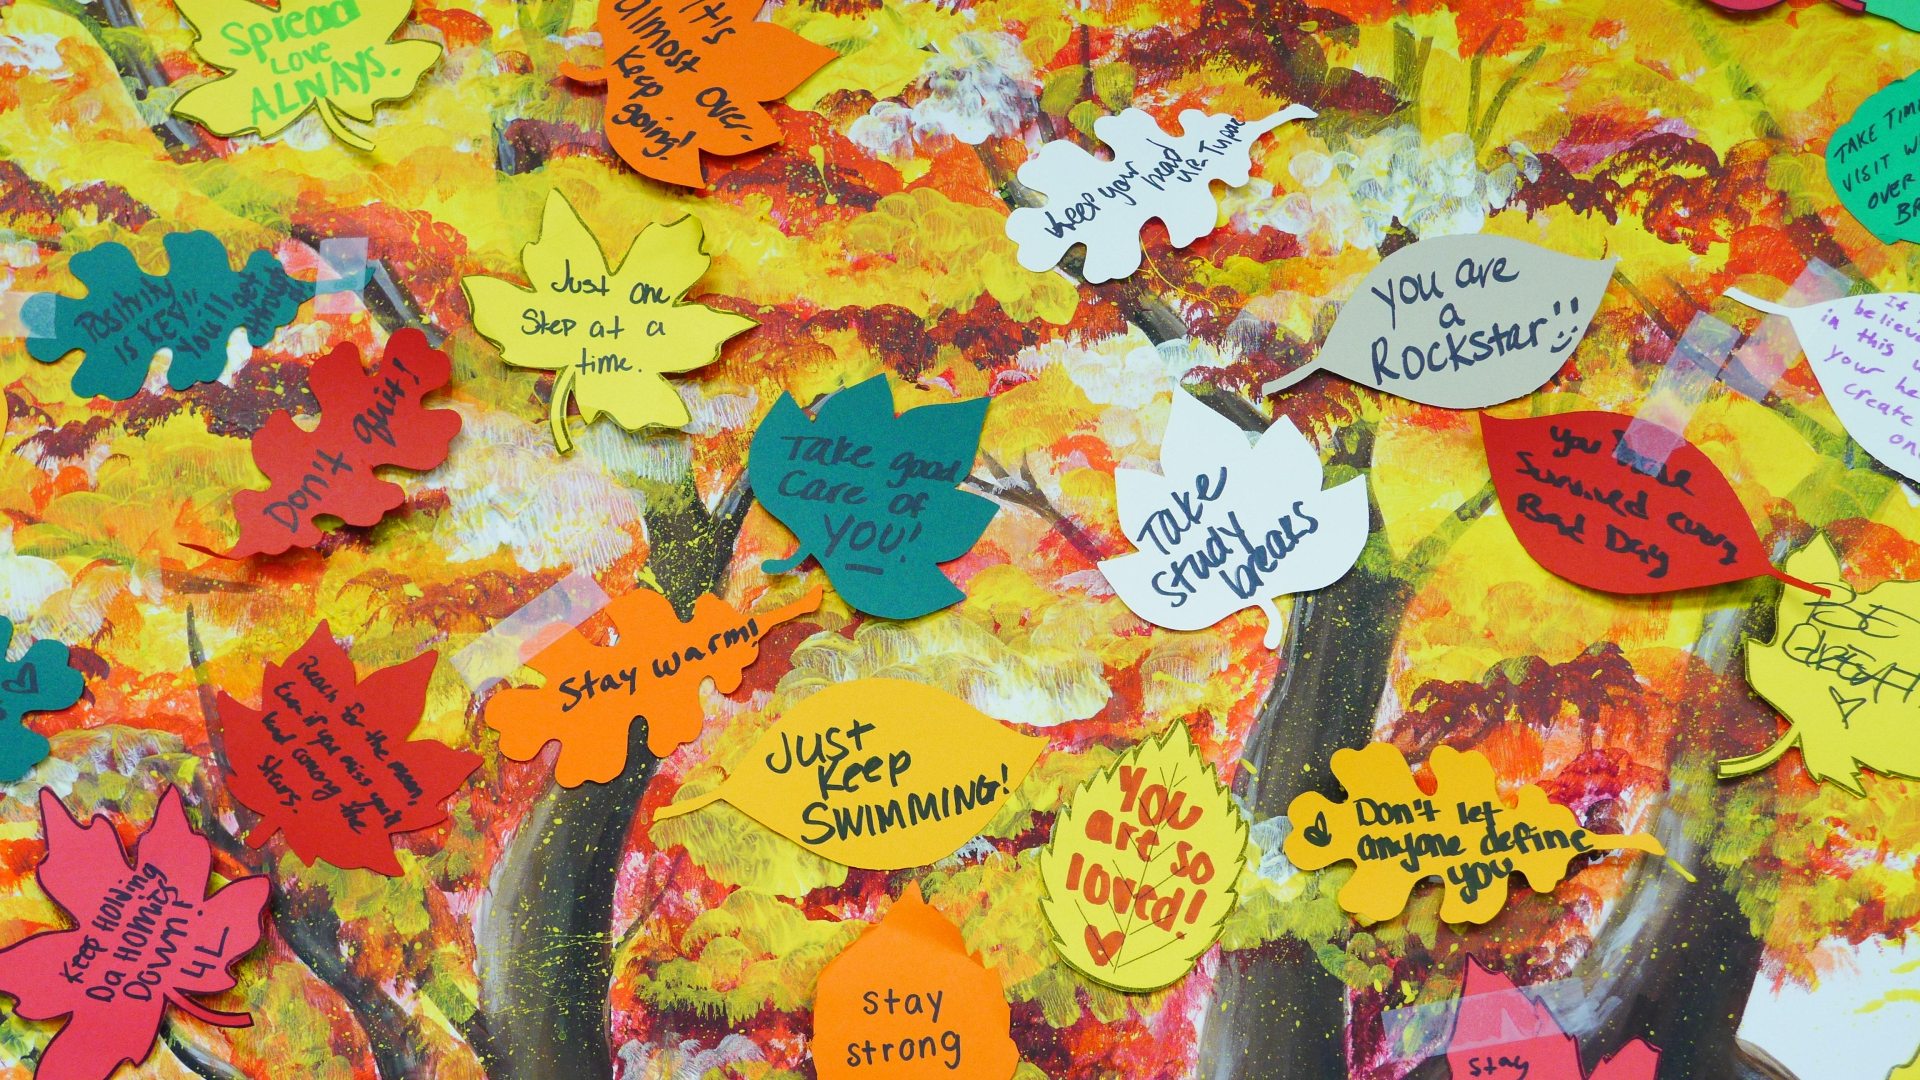 Painting of a tree with sticky note leafs. Positivity notes are written on them.